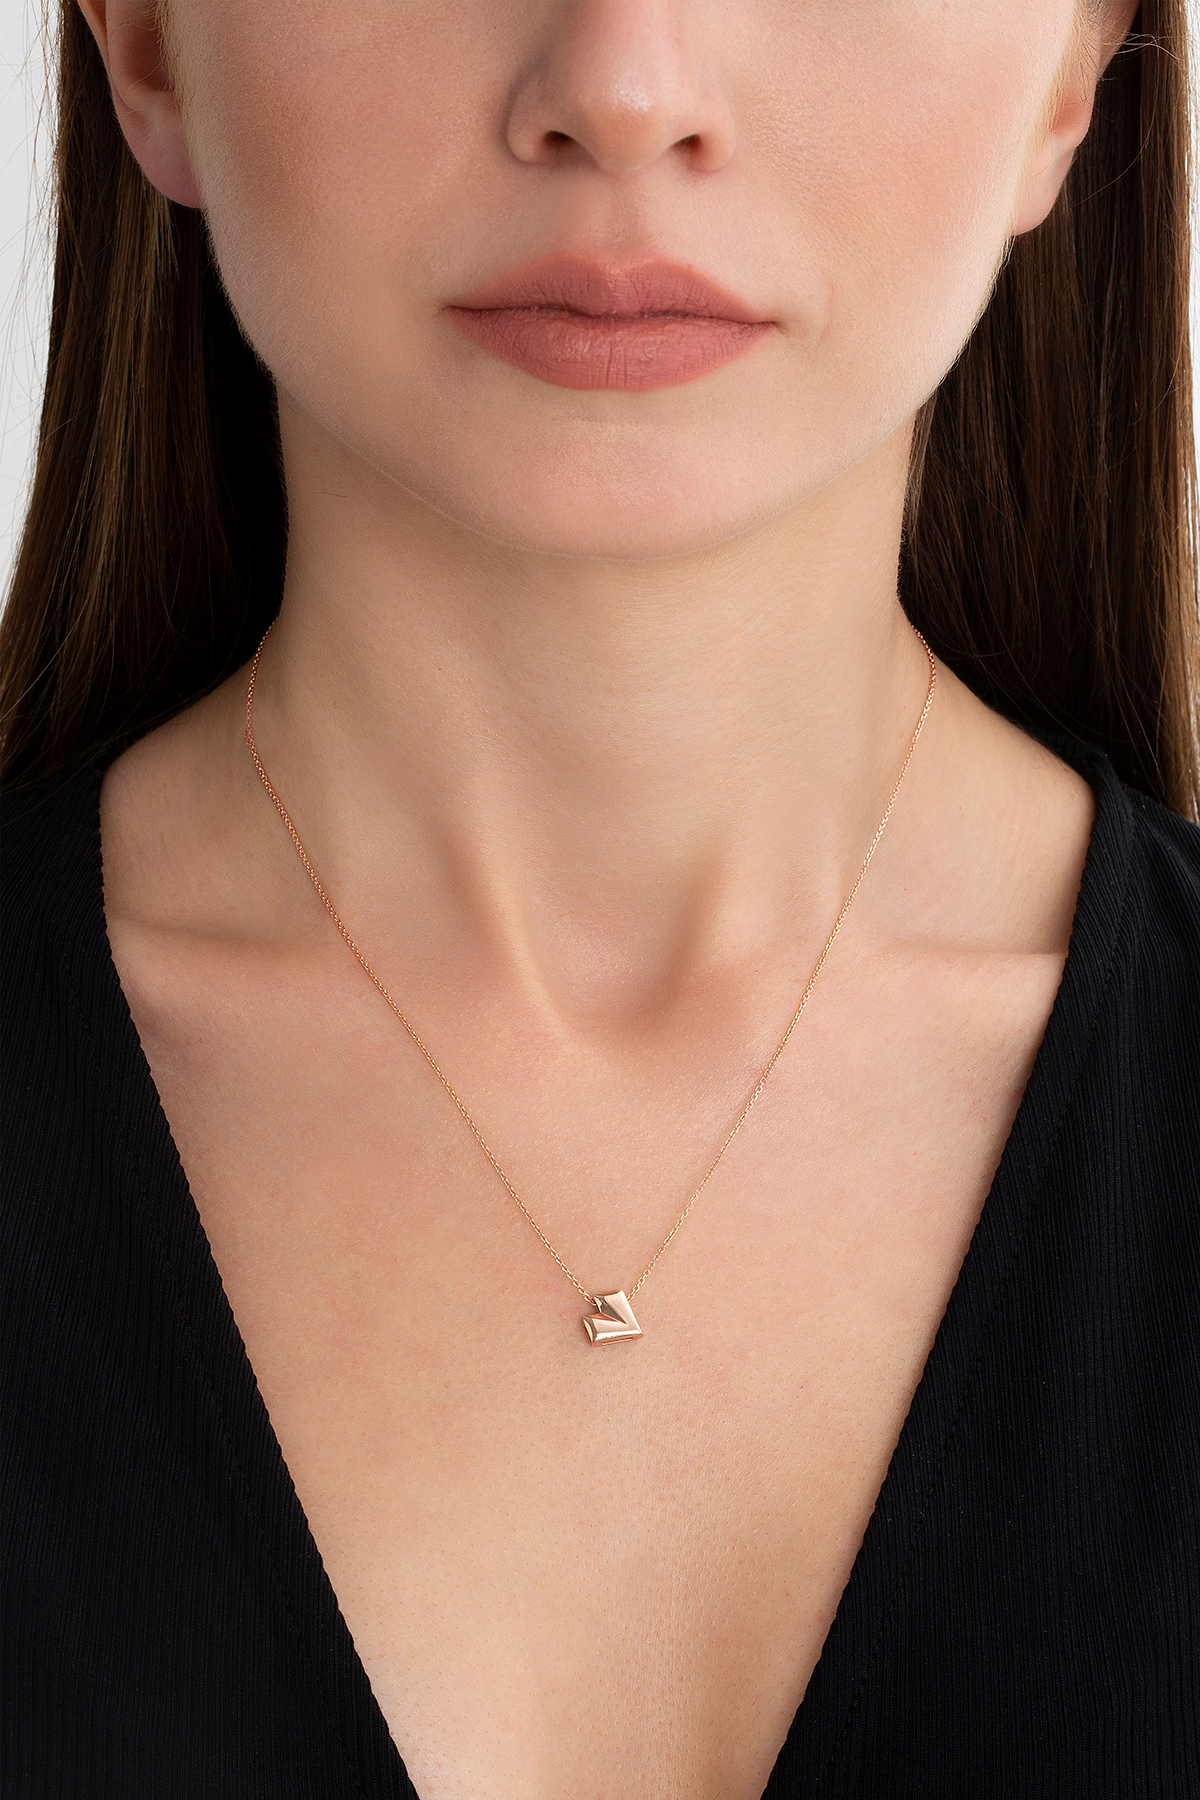 Origami Love Little Necklace in Rose Gold - Her Story Shop